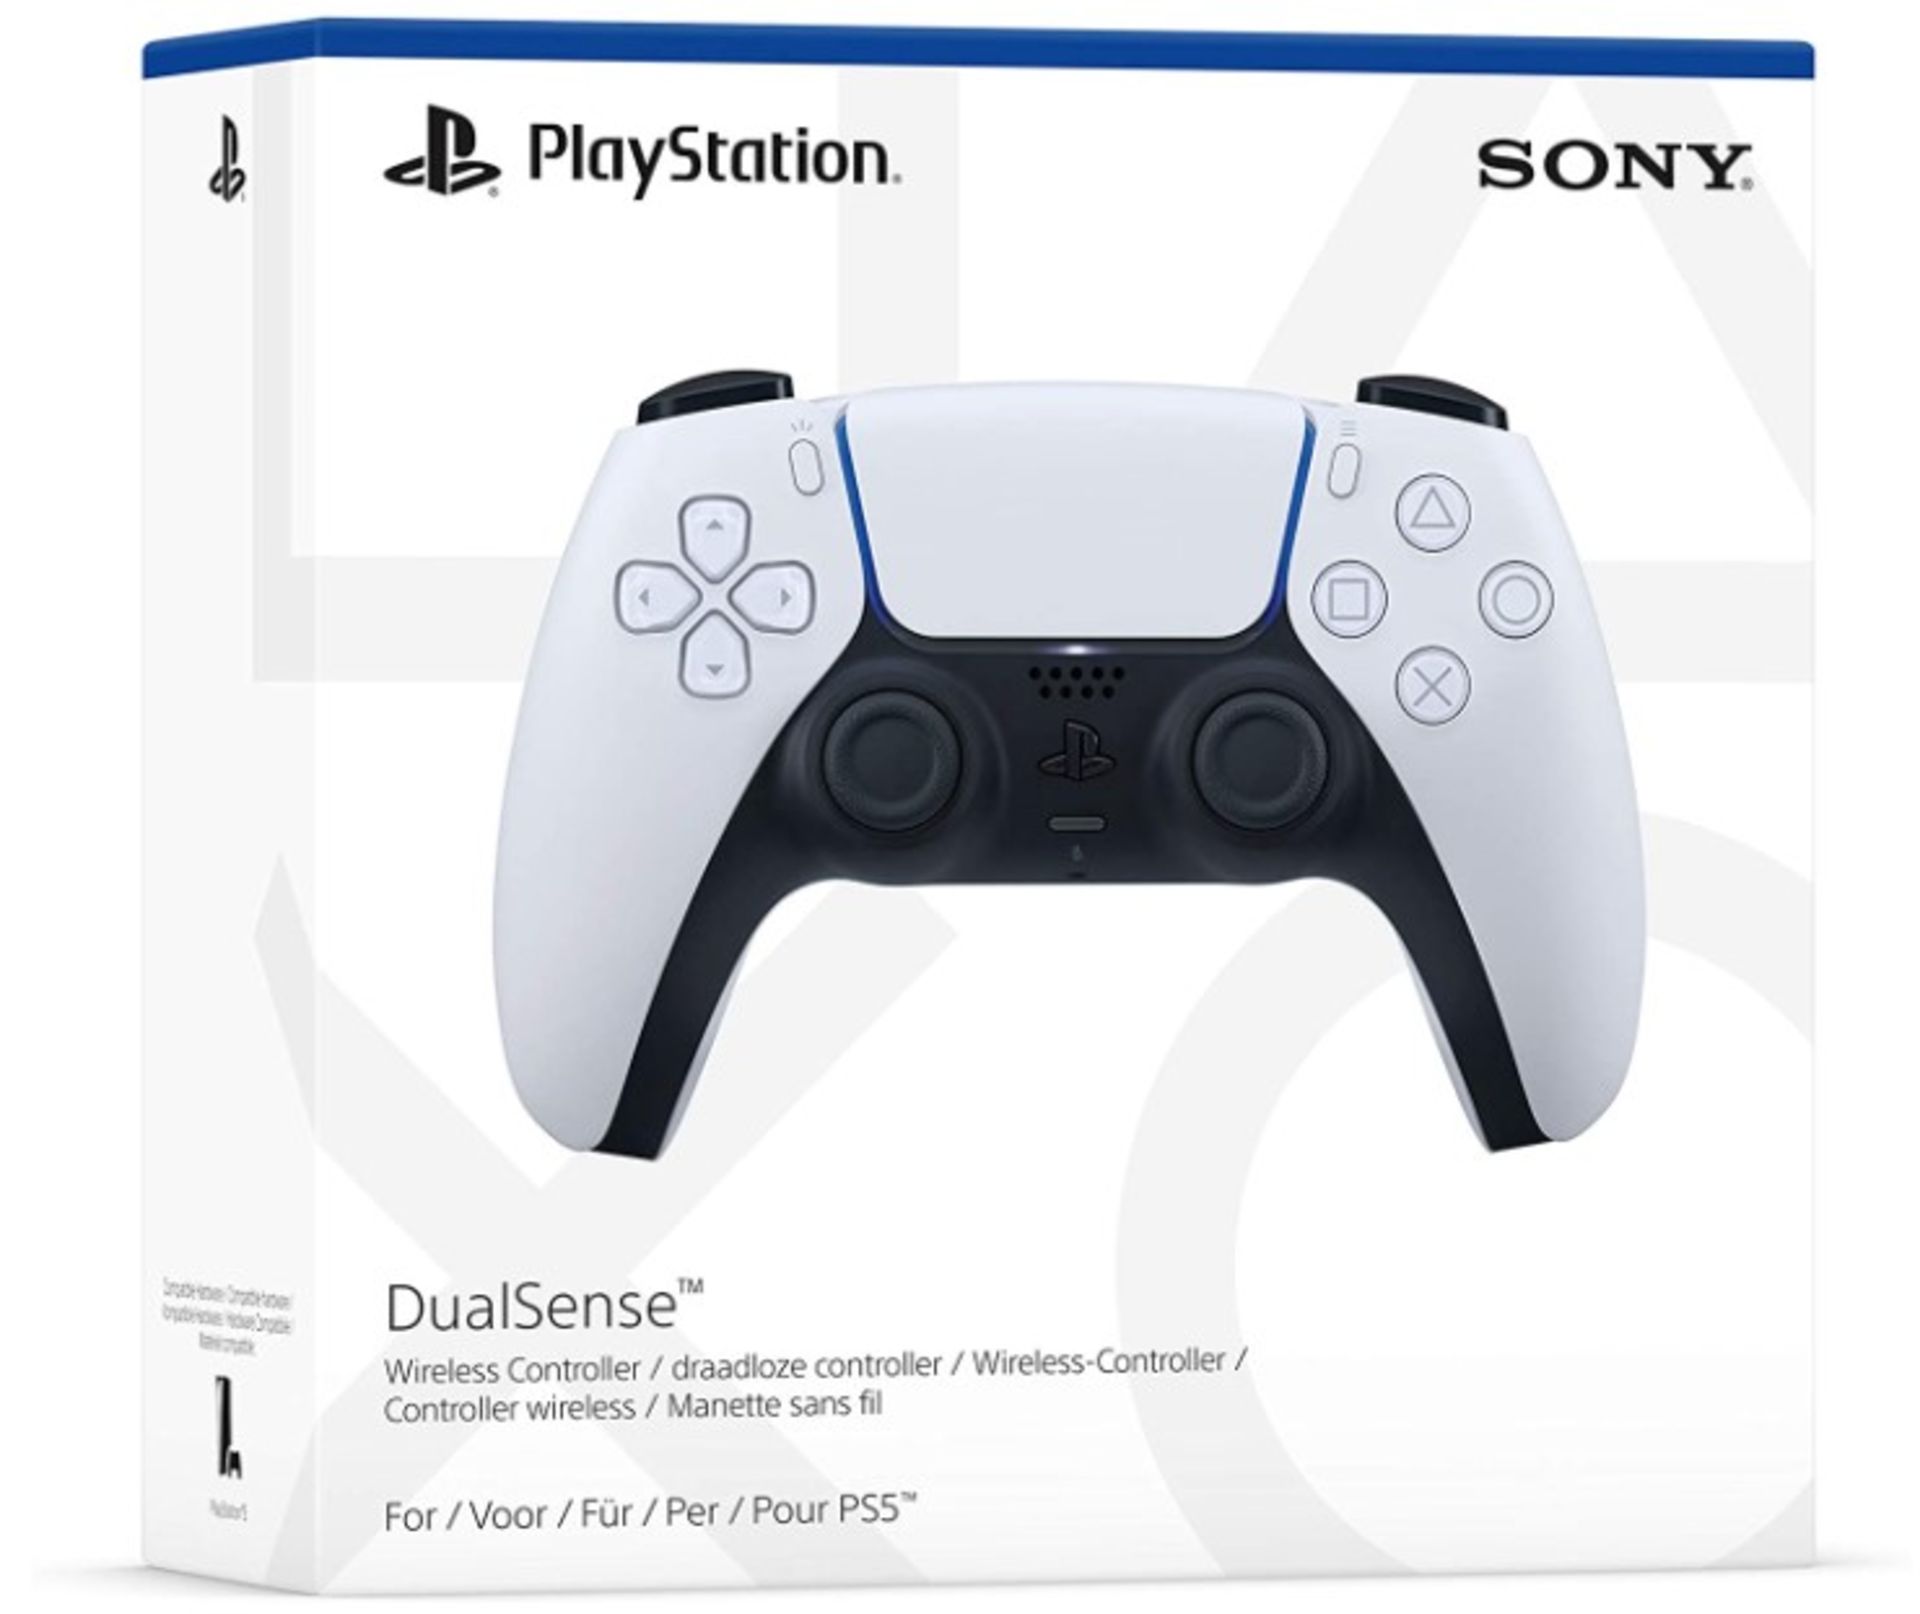 (18/9C) RRP £56.99. Sony Playstation Dualsense Wireless Controller For PS5.